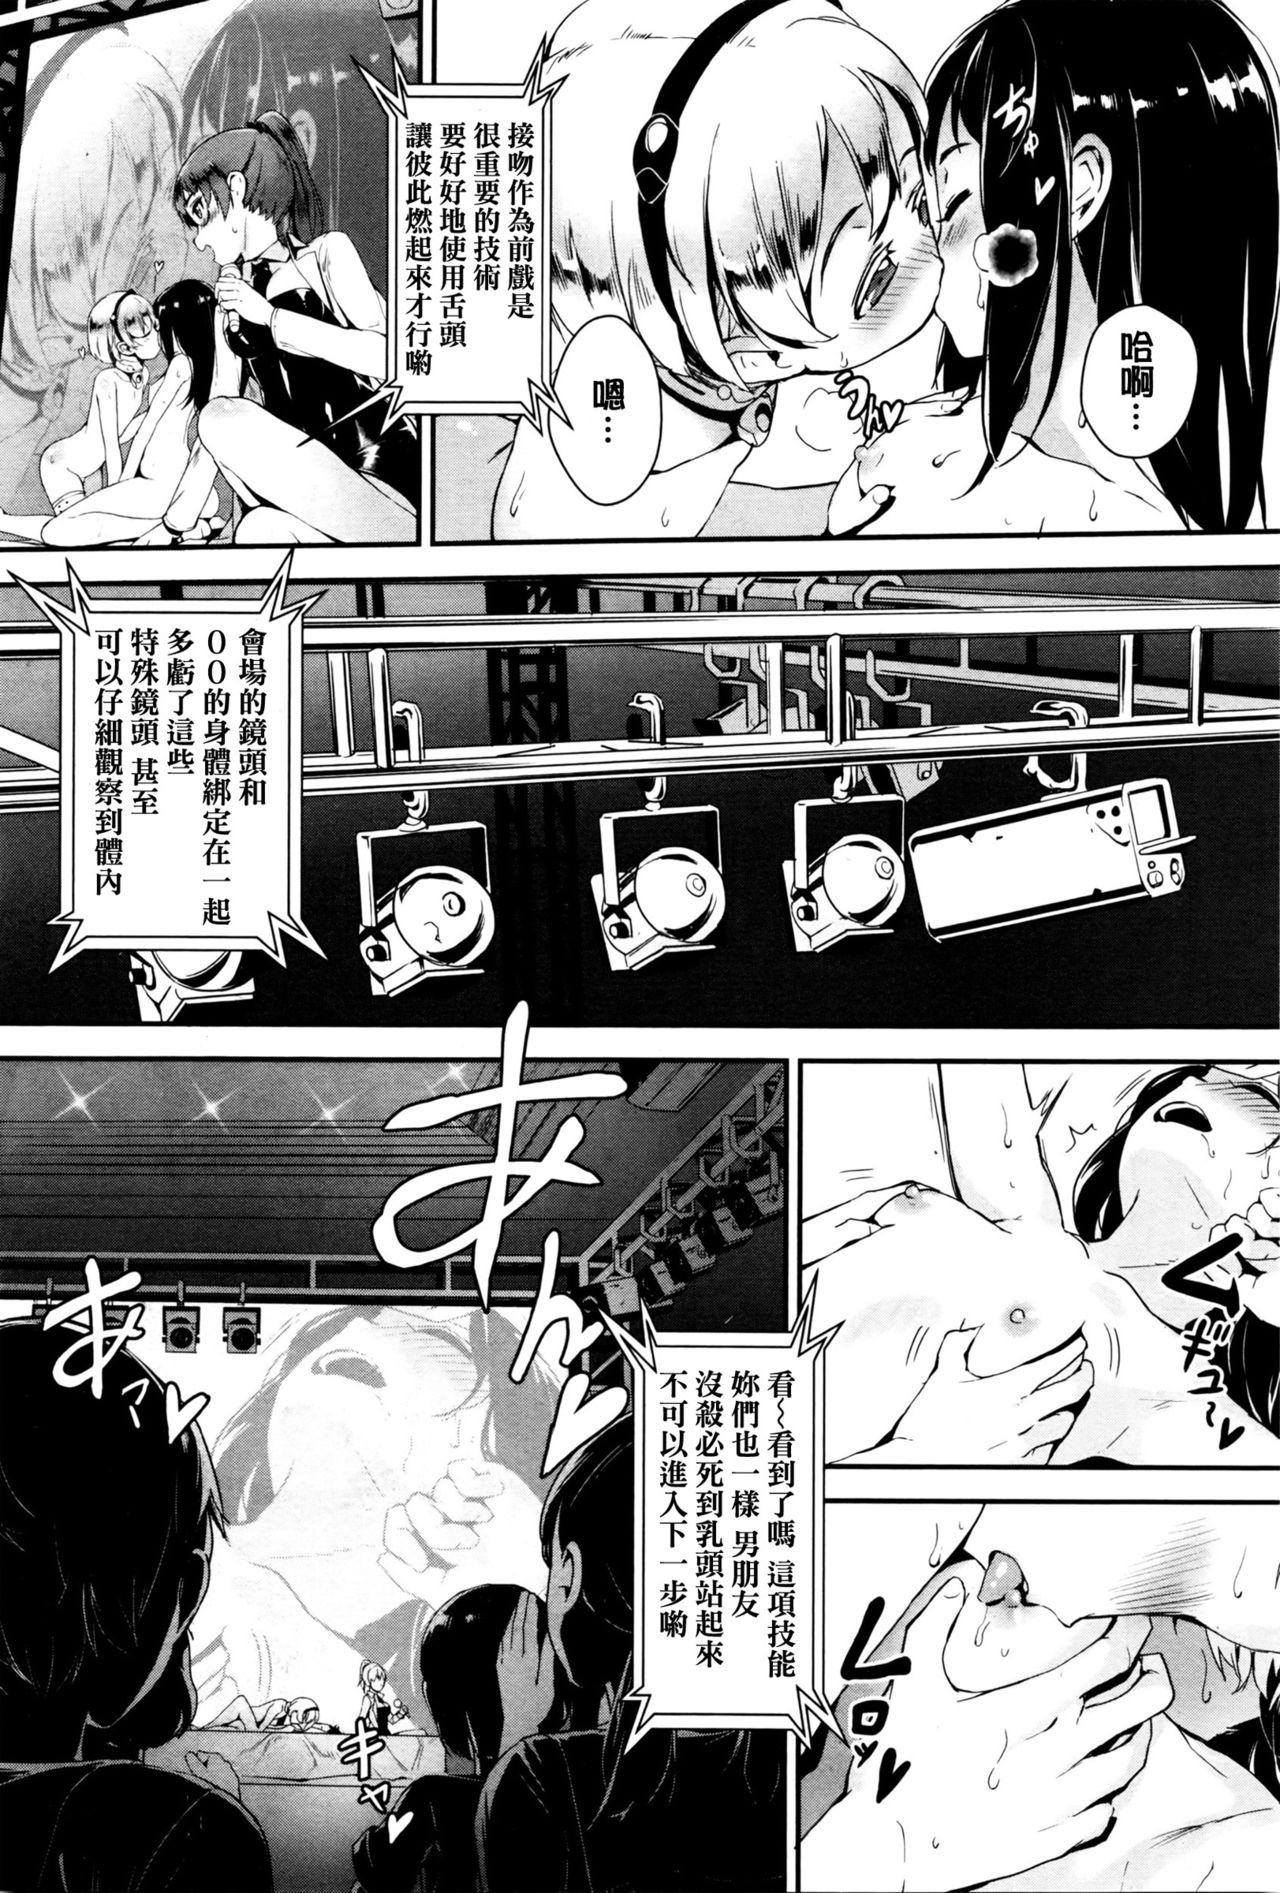 [Jairou] T.F.S - Training For Sex Ch. 1-3 [Chinese] 13